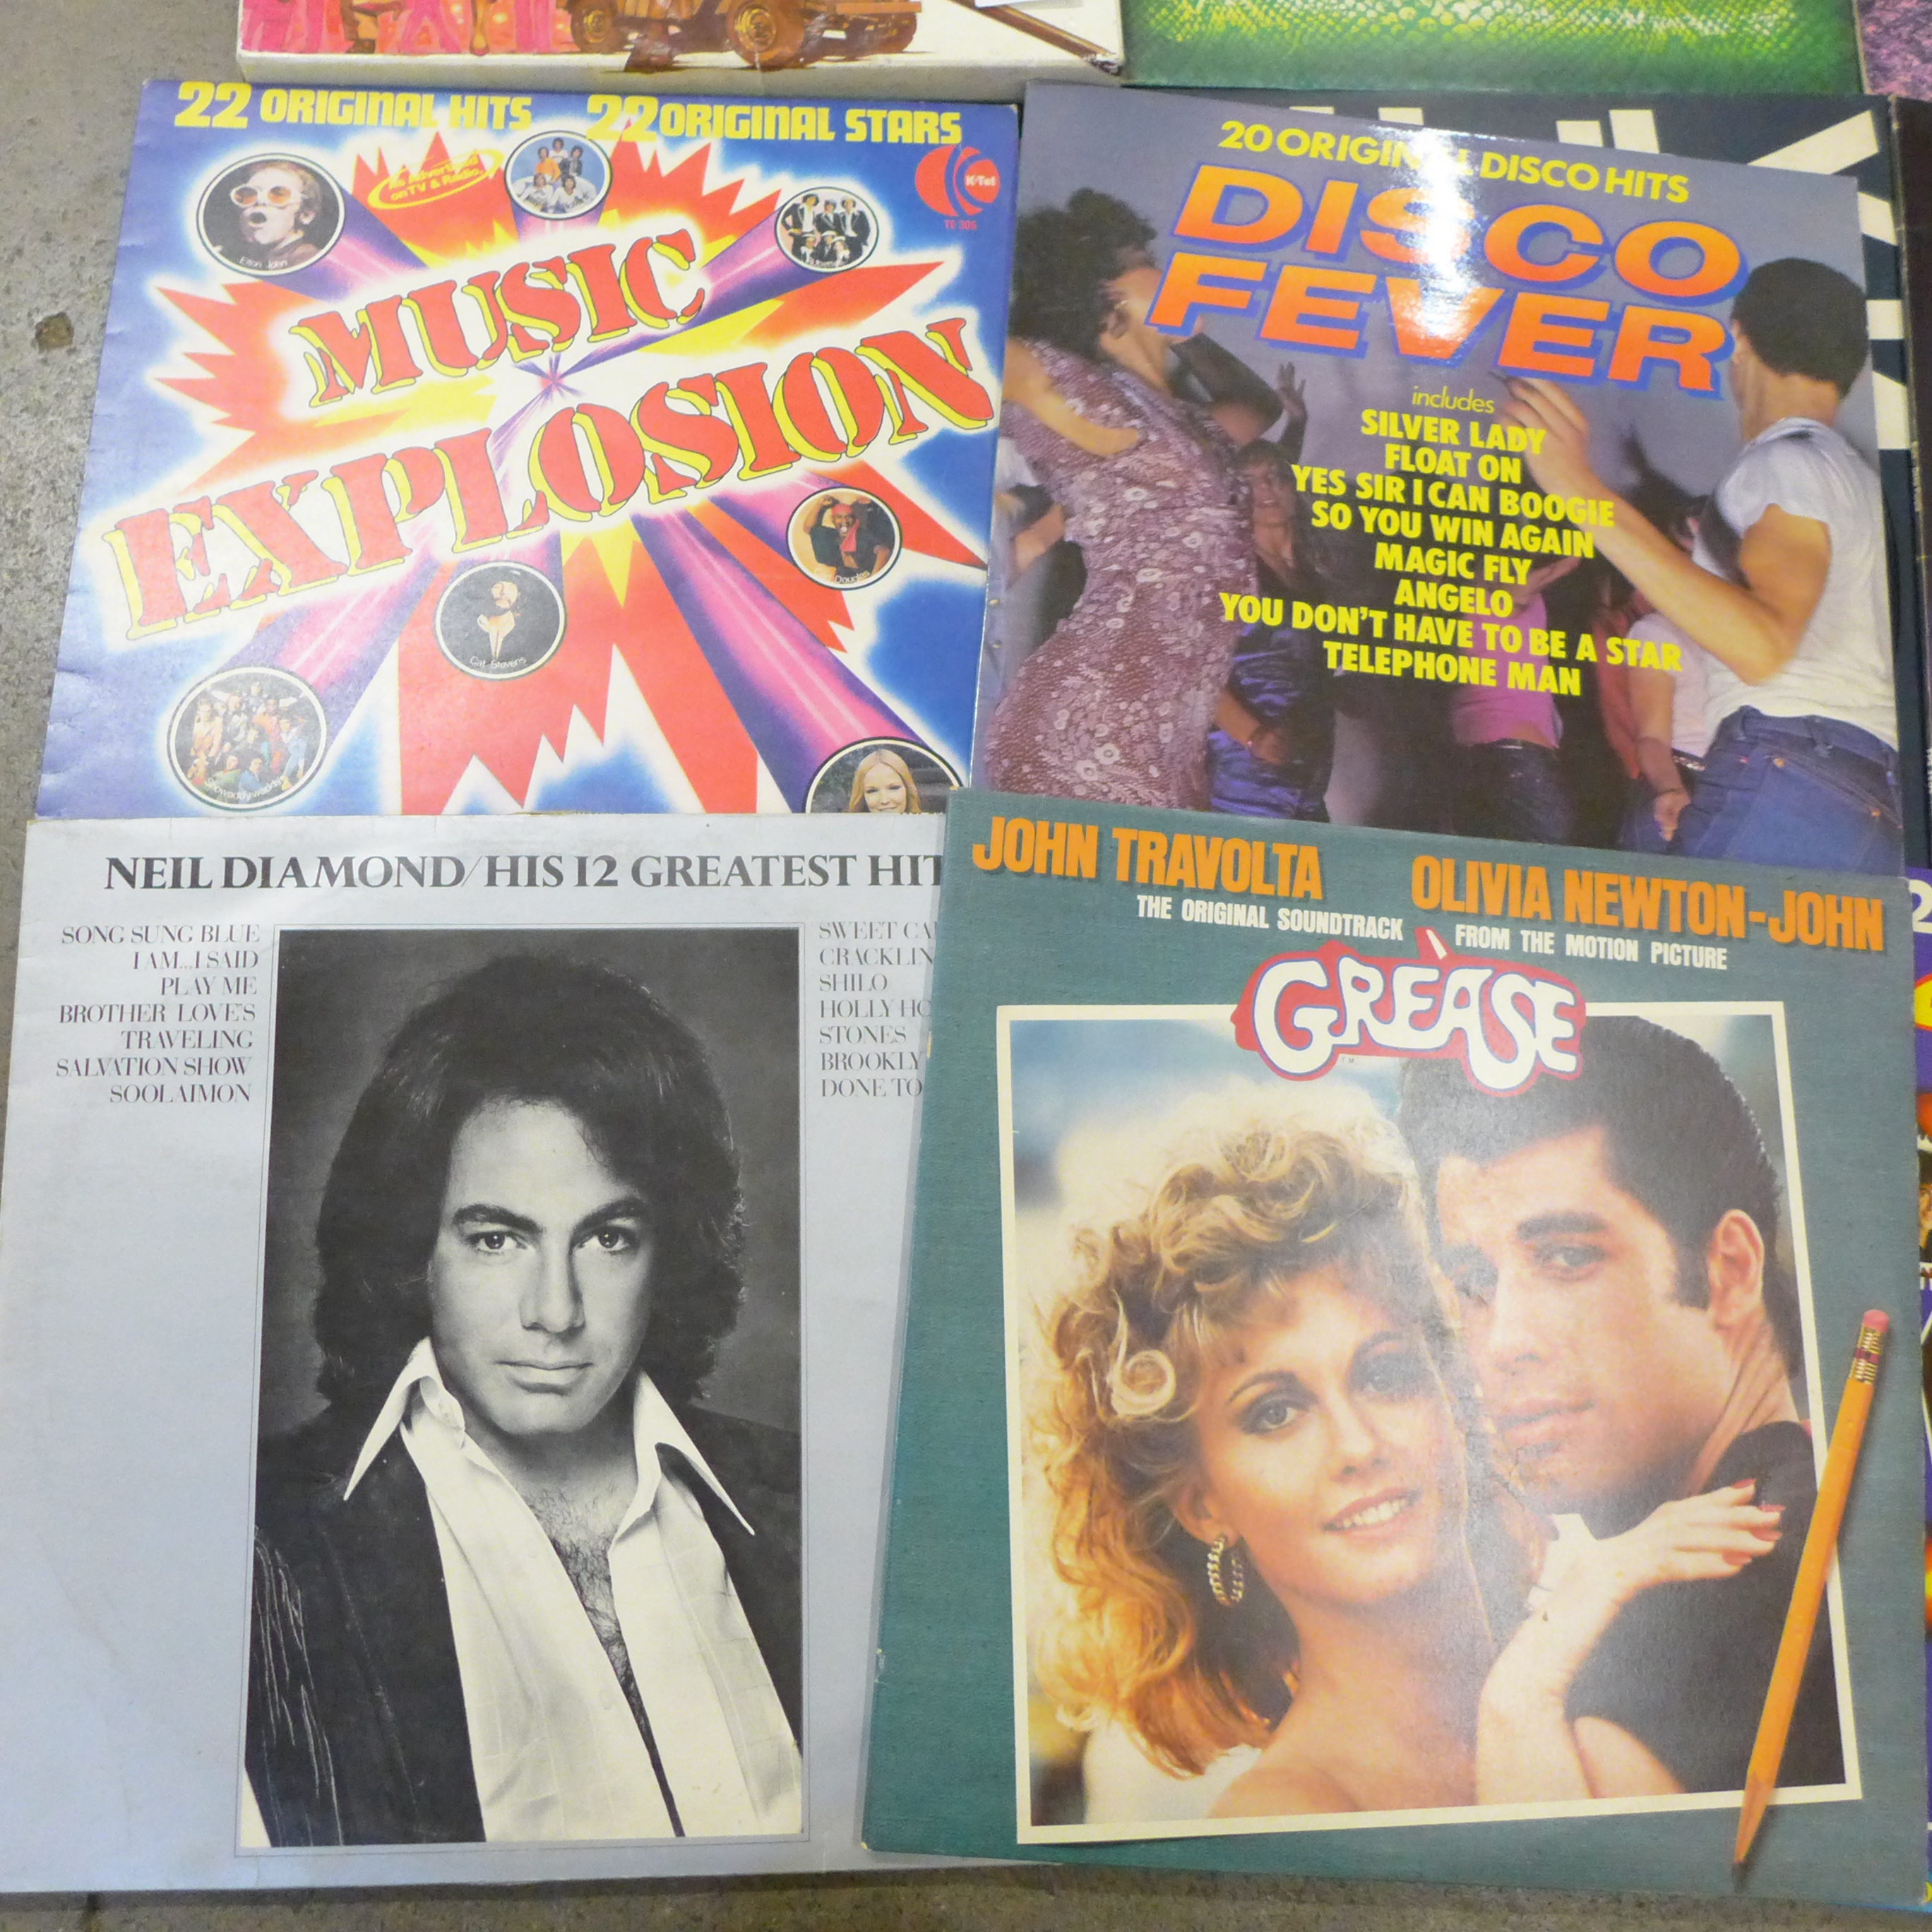 A collection of LP records; Alice Cooper, Black Sabbath, Glen Miller, Bee Gees, etc. (19) - Image 3 of 3